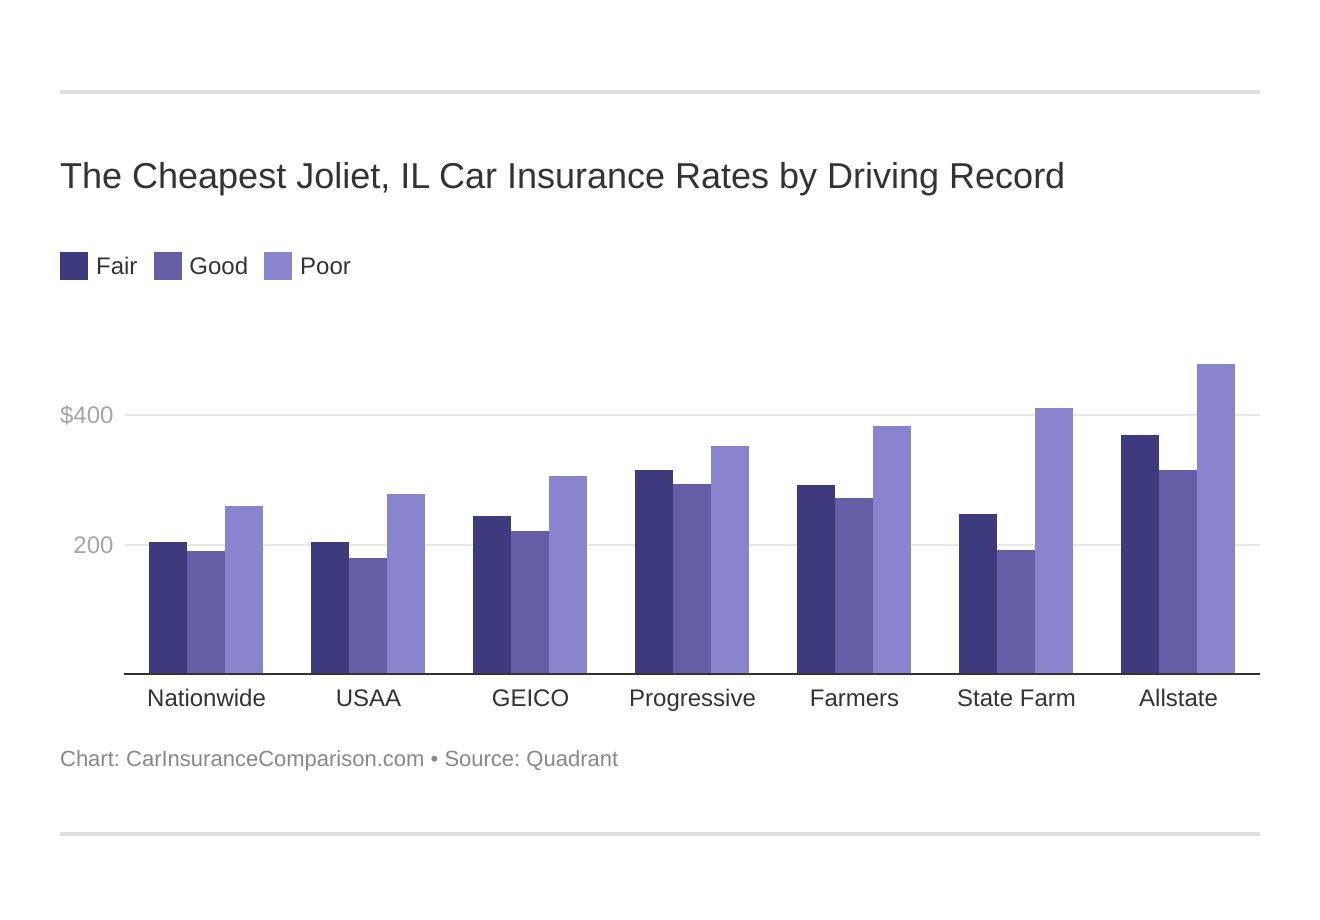 The Cheapest Joliet, IL Car Insurance Rates by Driving Record